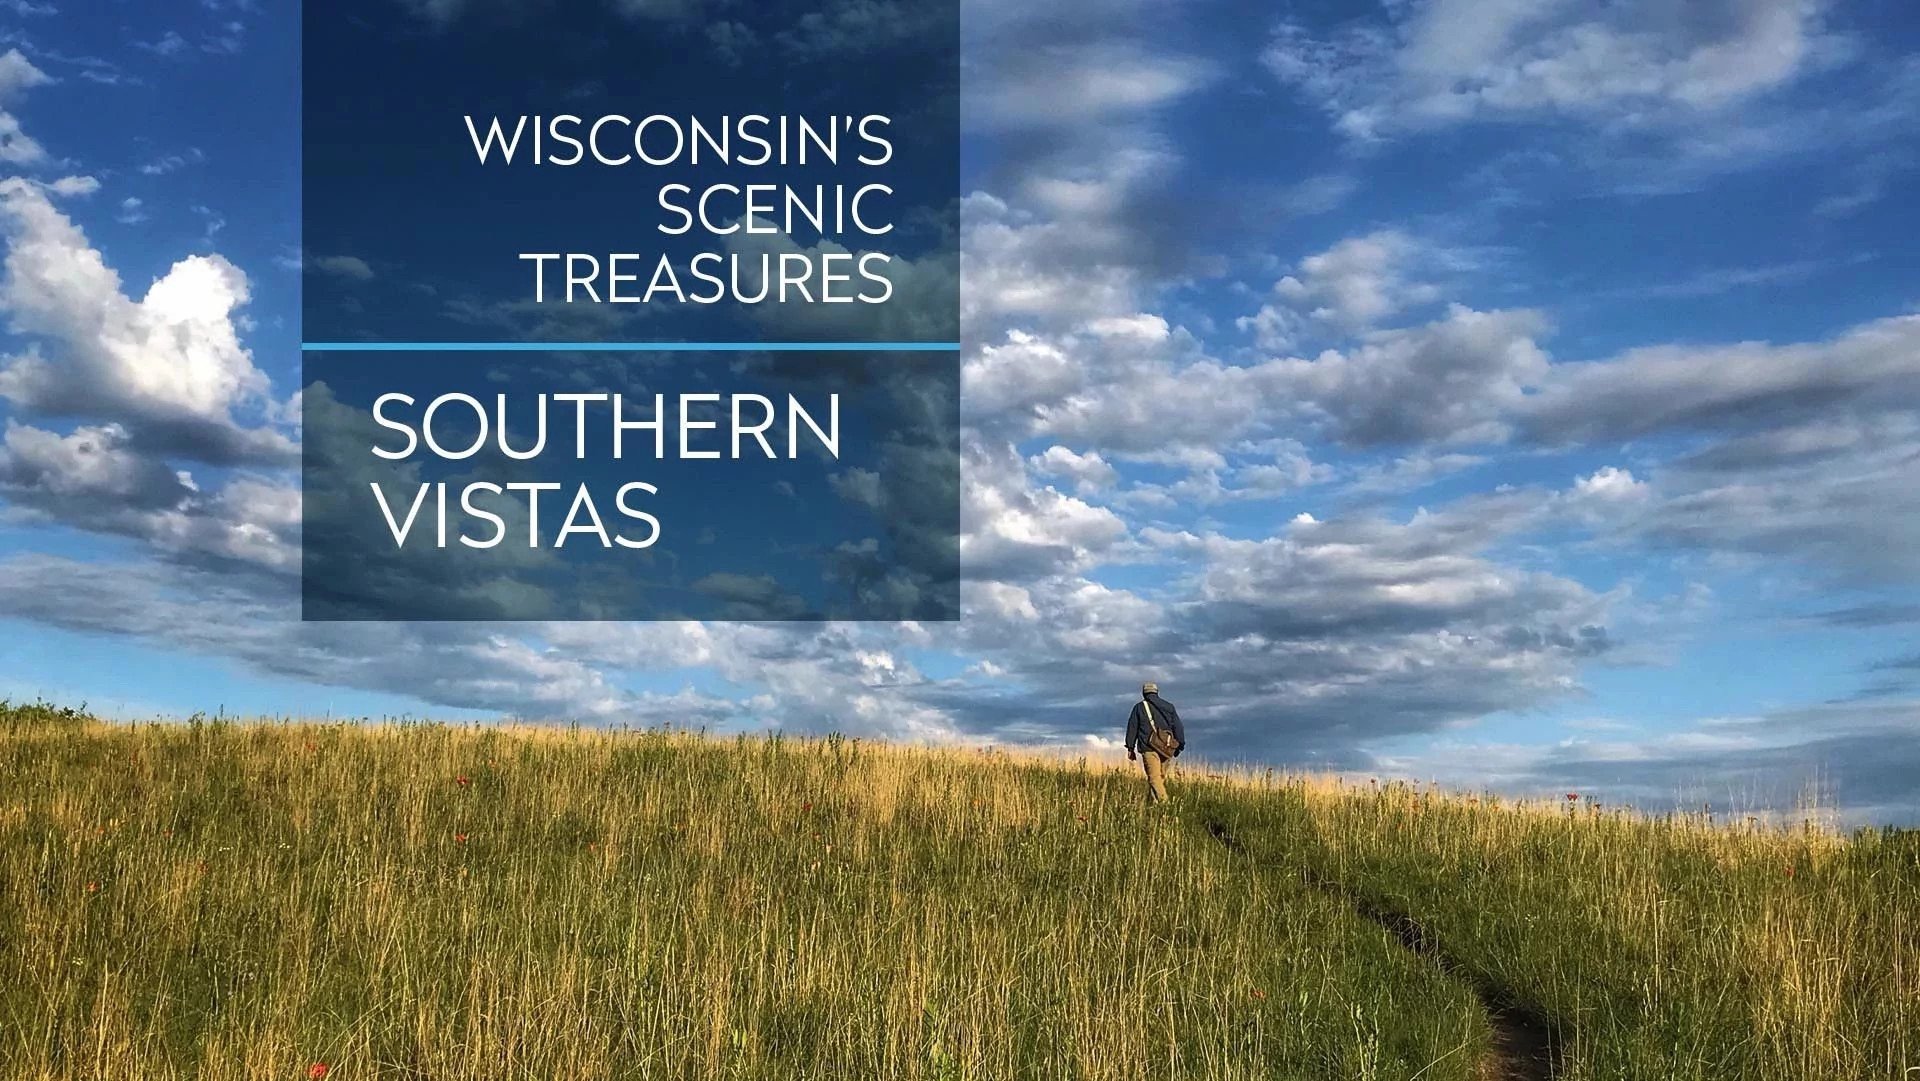 open field with graphic reading "Wisconsin's Scenic Treasures, Southern Vistas"